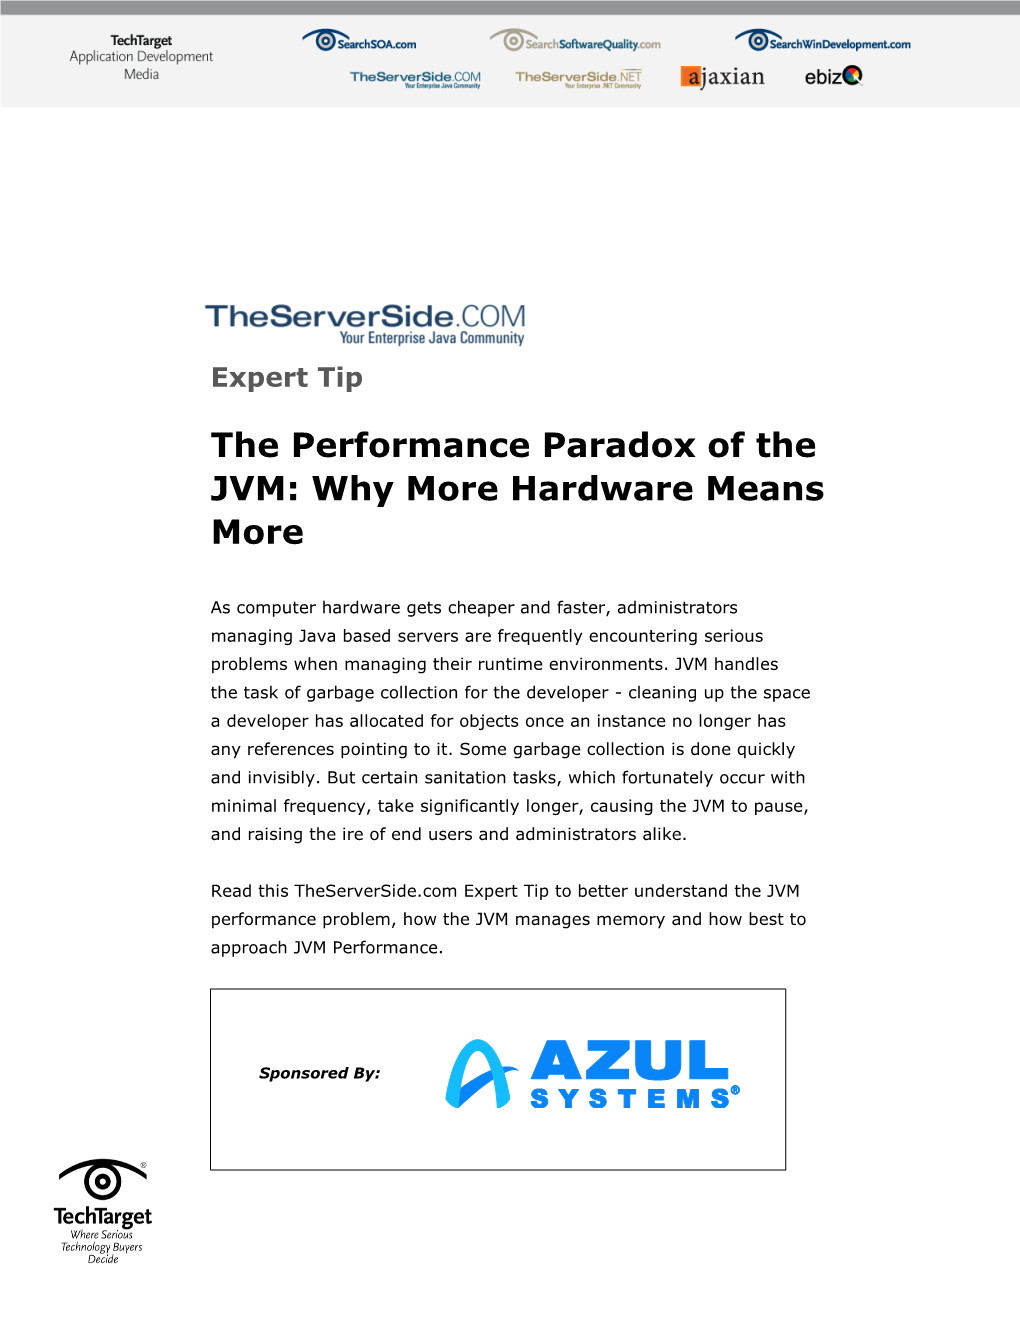 The Performance Paradox of the JVM: Why More Hardware Means More